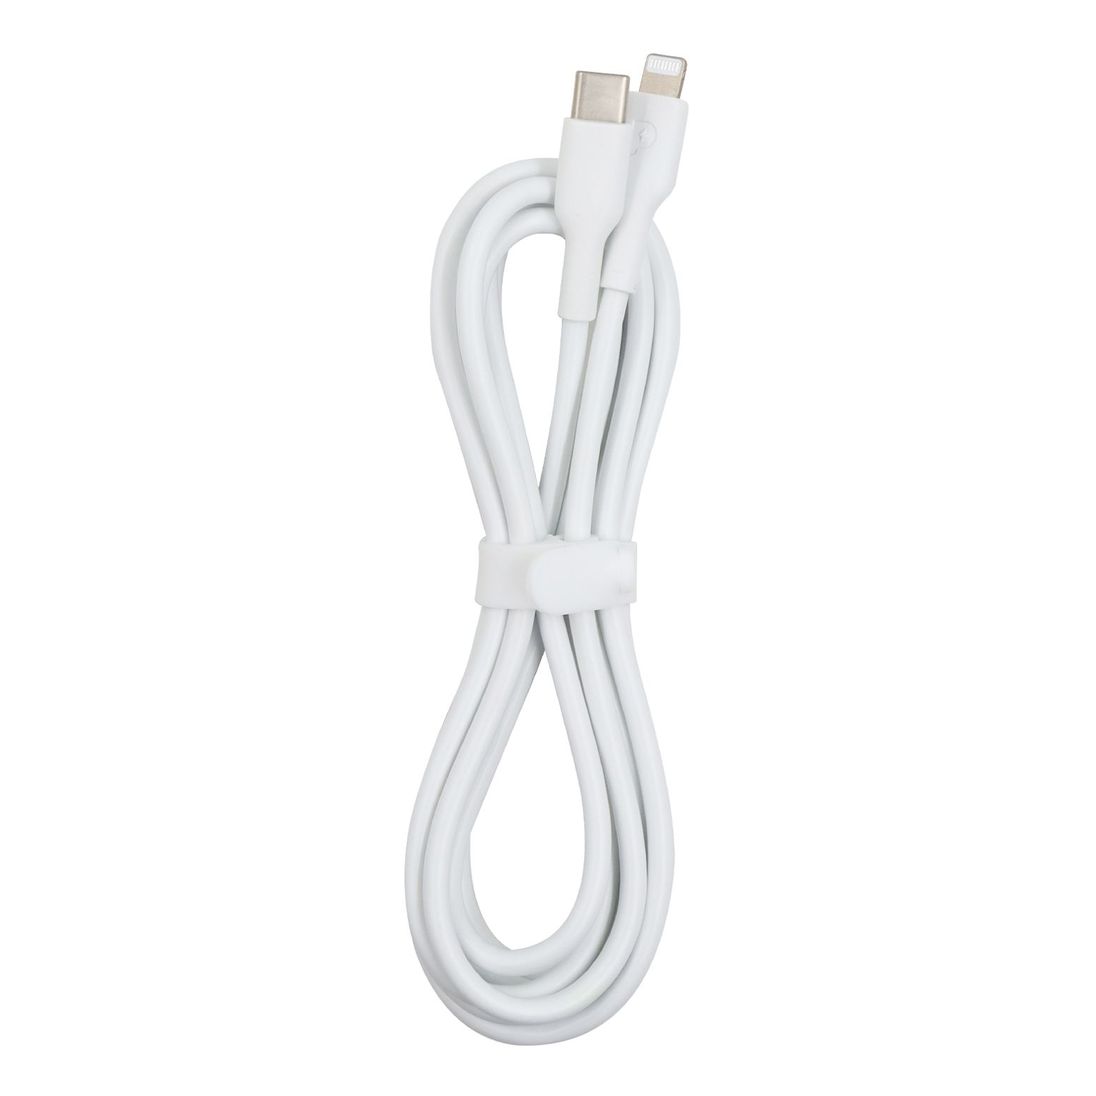 Powerology Type-C To Lightning Cable PD 20W - White